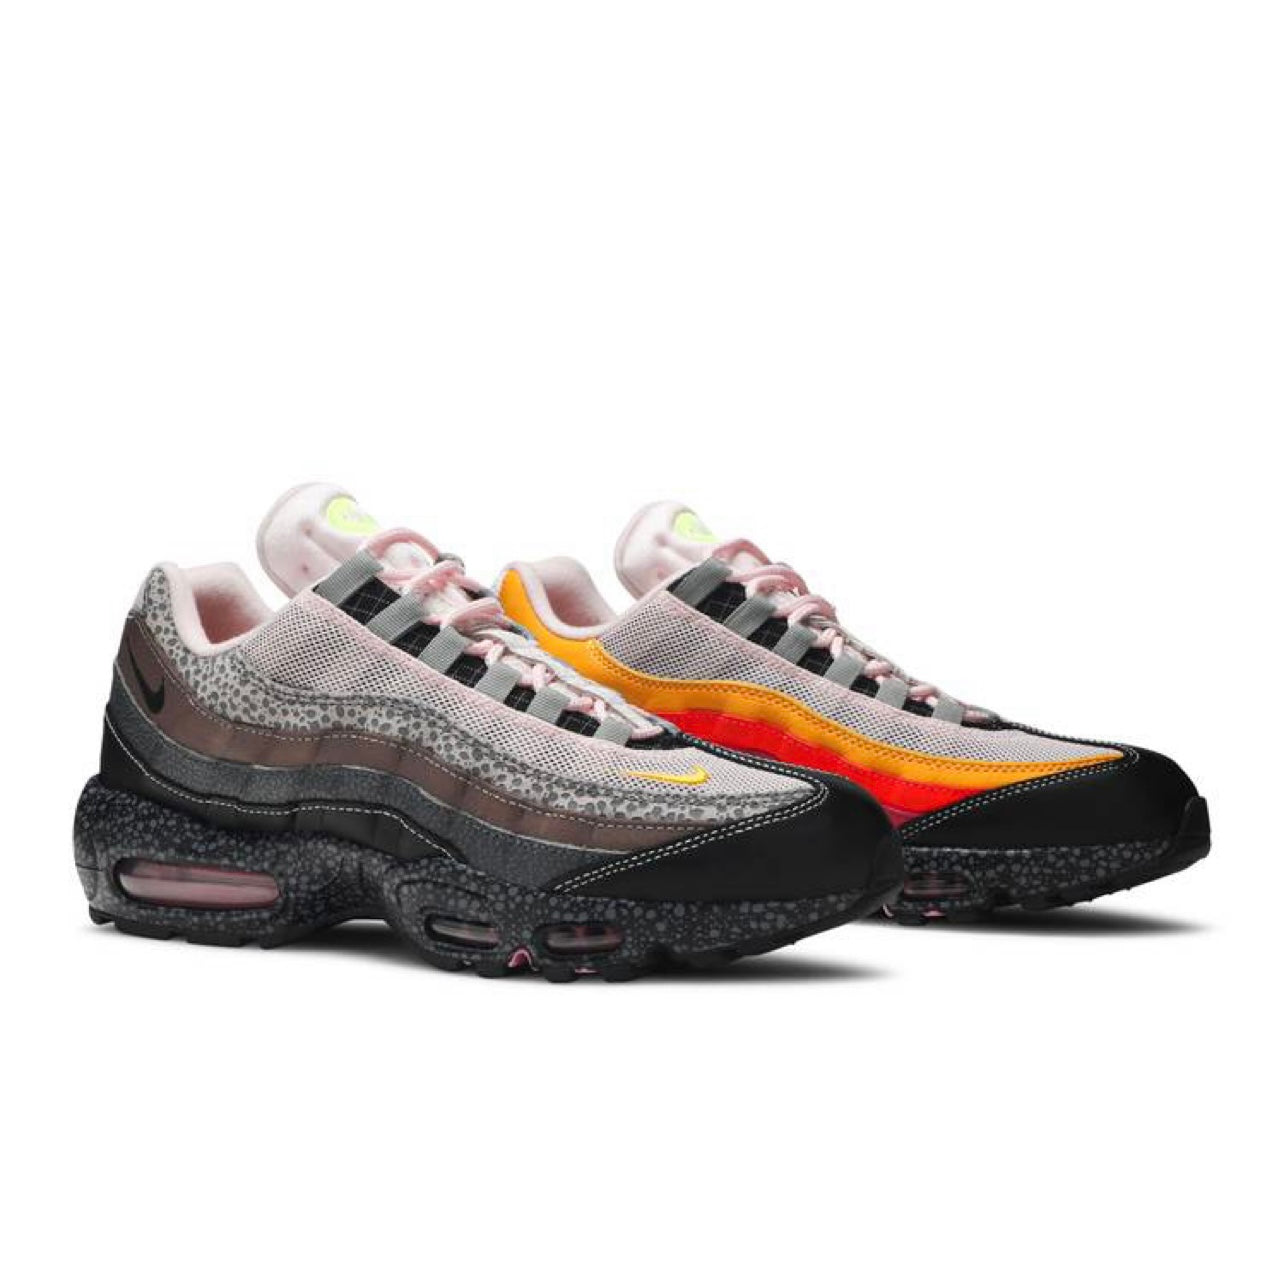 Exclusive)Nike Airmax 95 x Size? '20 for 20' |